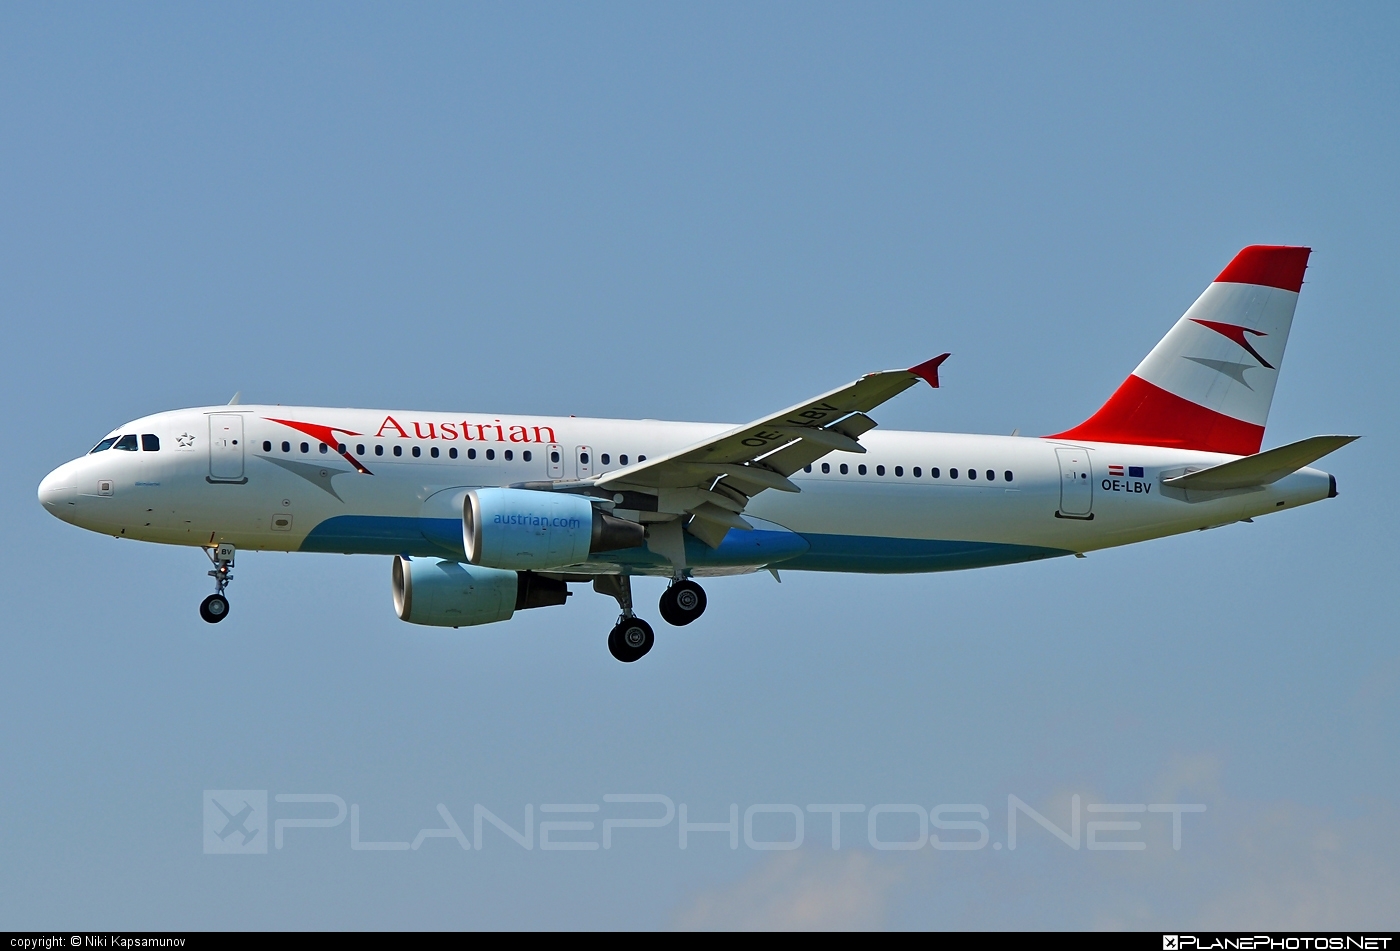 Airbus A320-214 - OE-LBV operated by Austrian Airlines #a320 #a320family #airbus #airbus320 #austrian #austrianAirlines